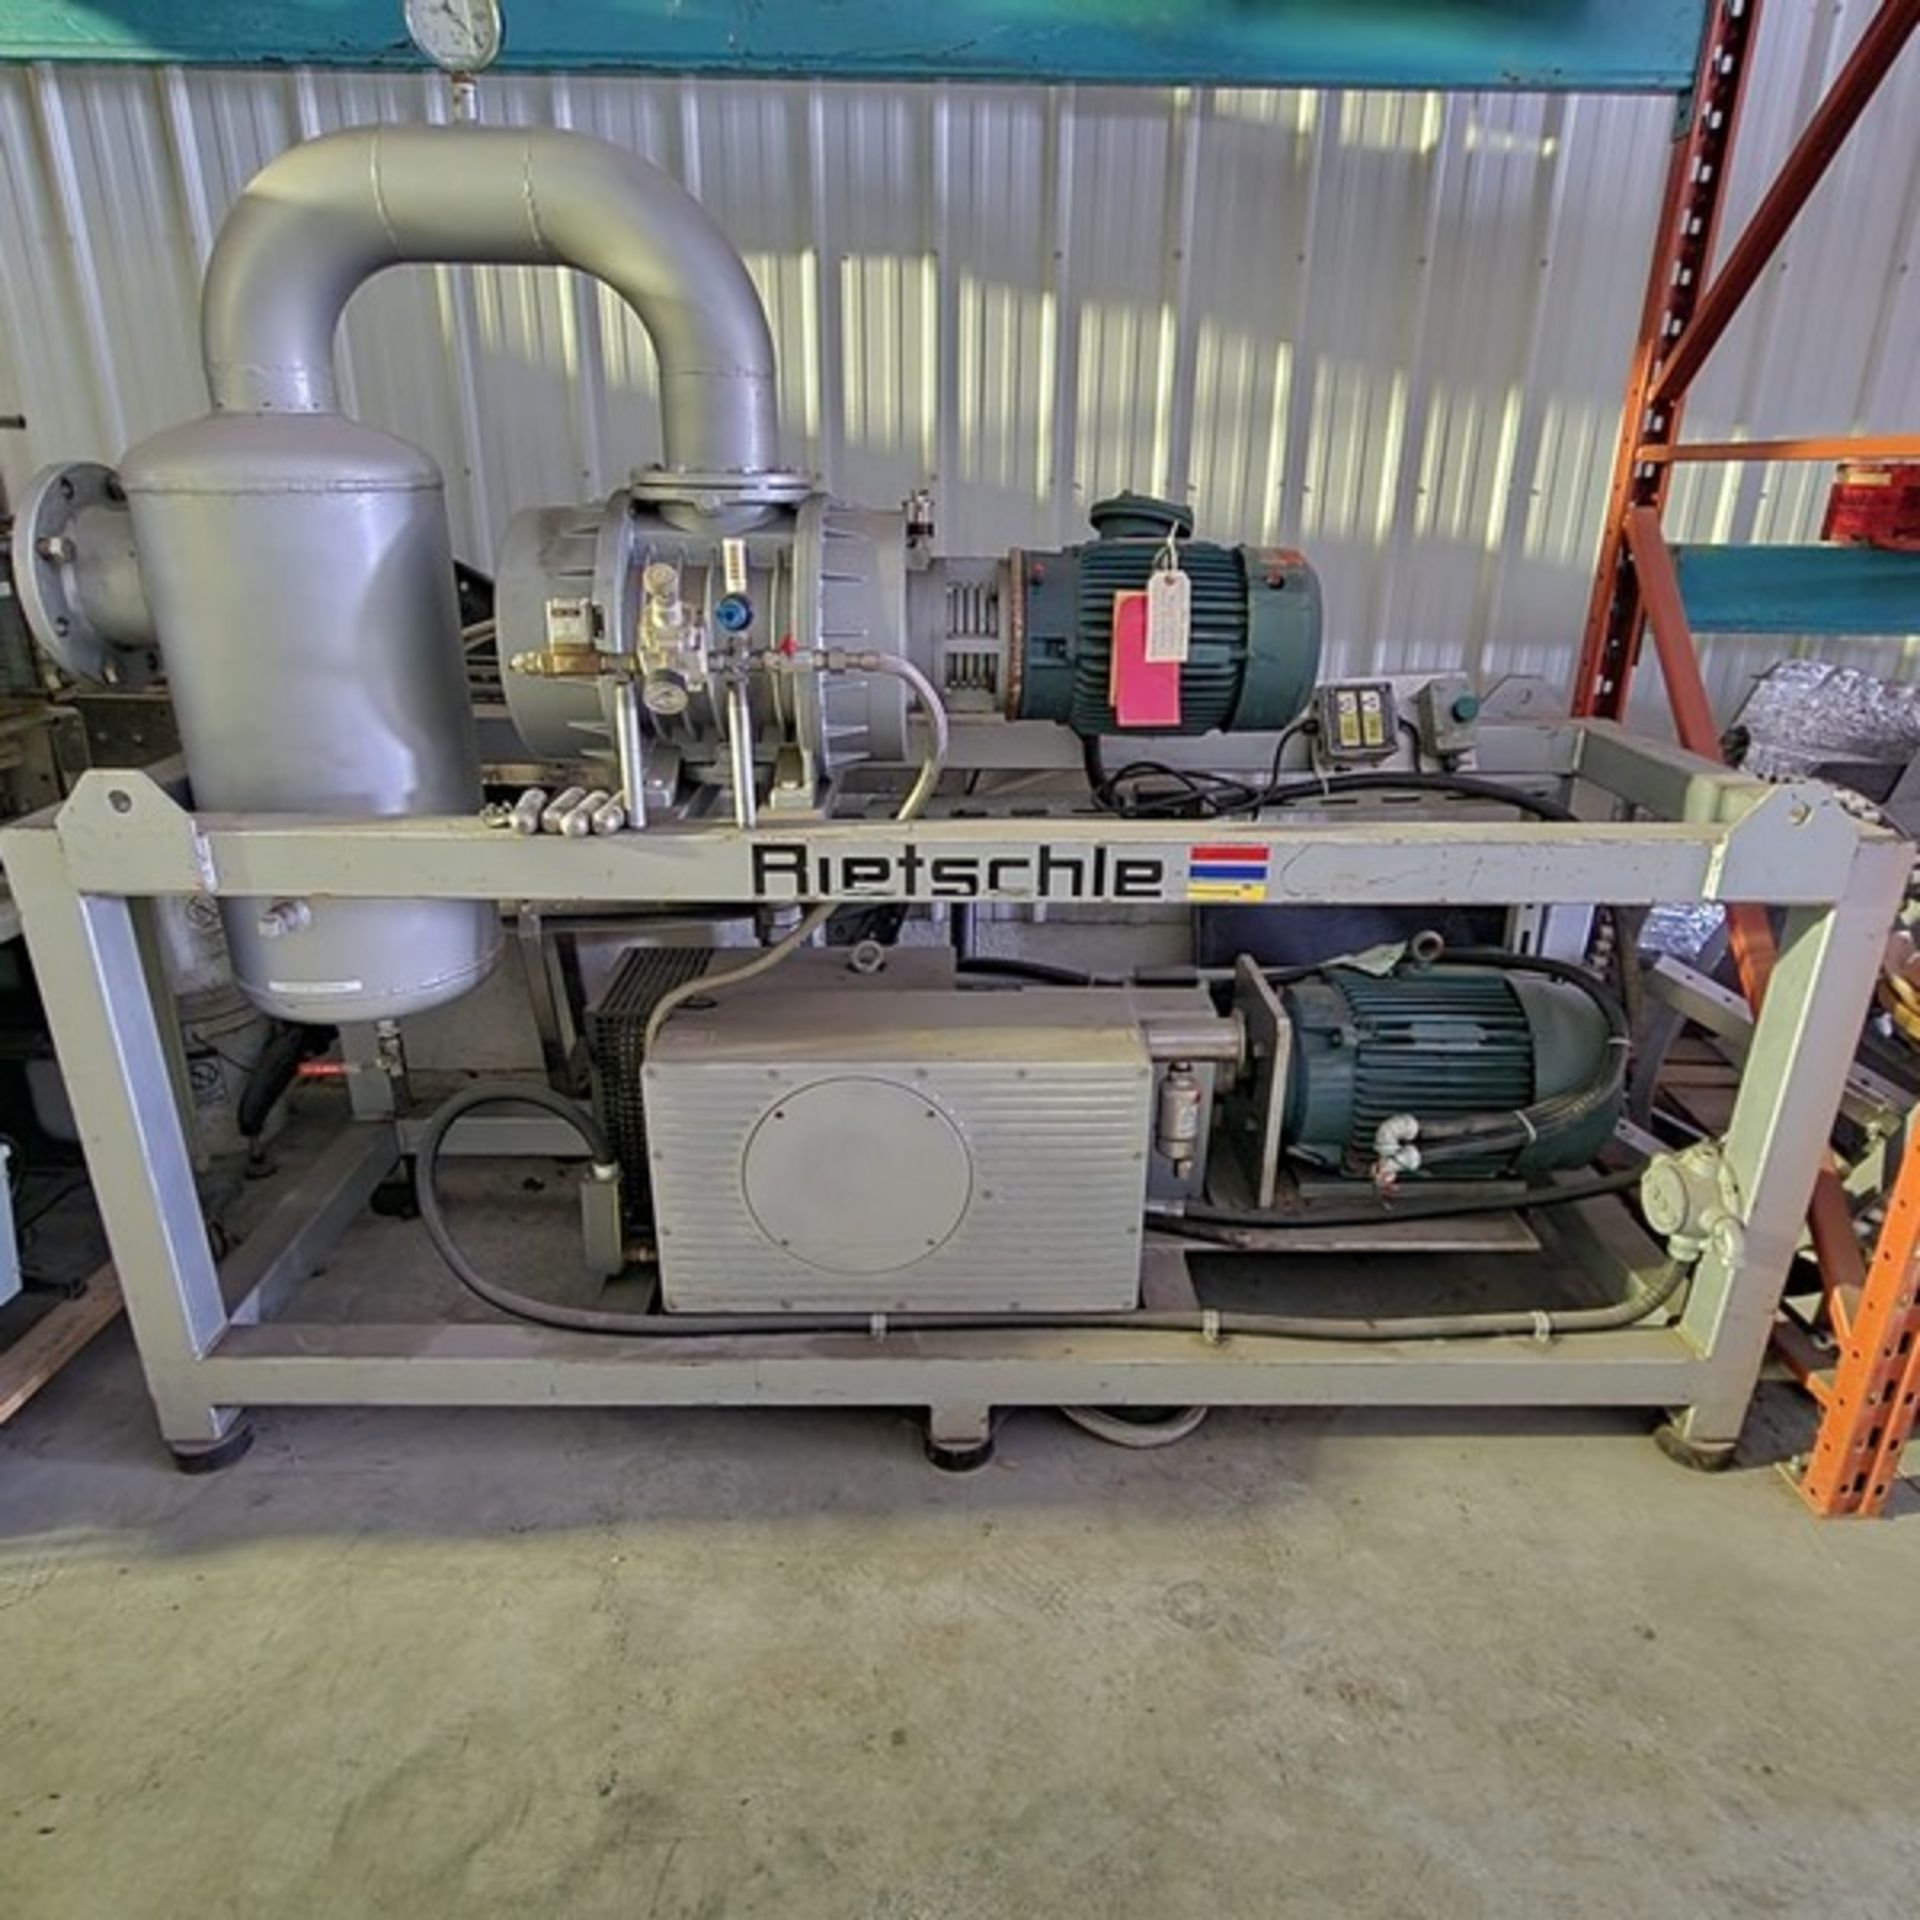 Rietschle Vacuum System modele VC300 01, 02567-0113 TYPE 1000 575volts / 5.20 / 3PH /60Hz 1 / SF 1, - Image 4 of 11